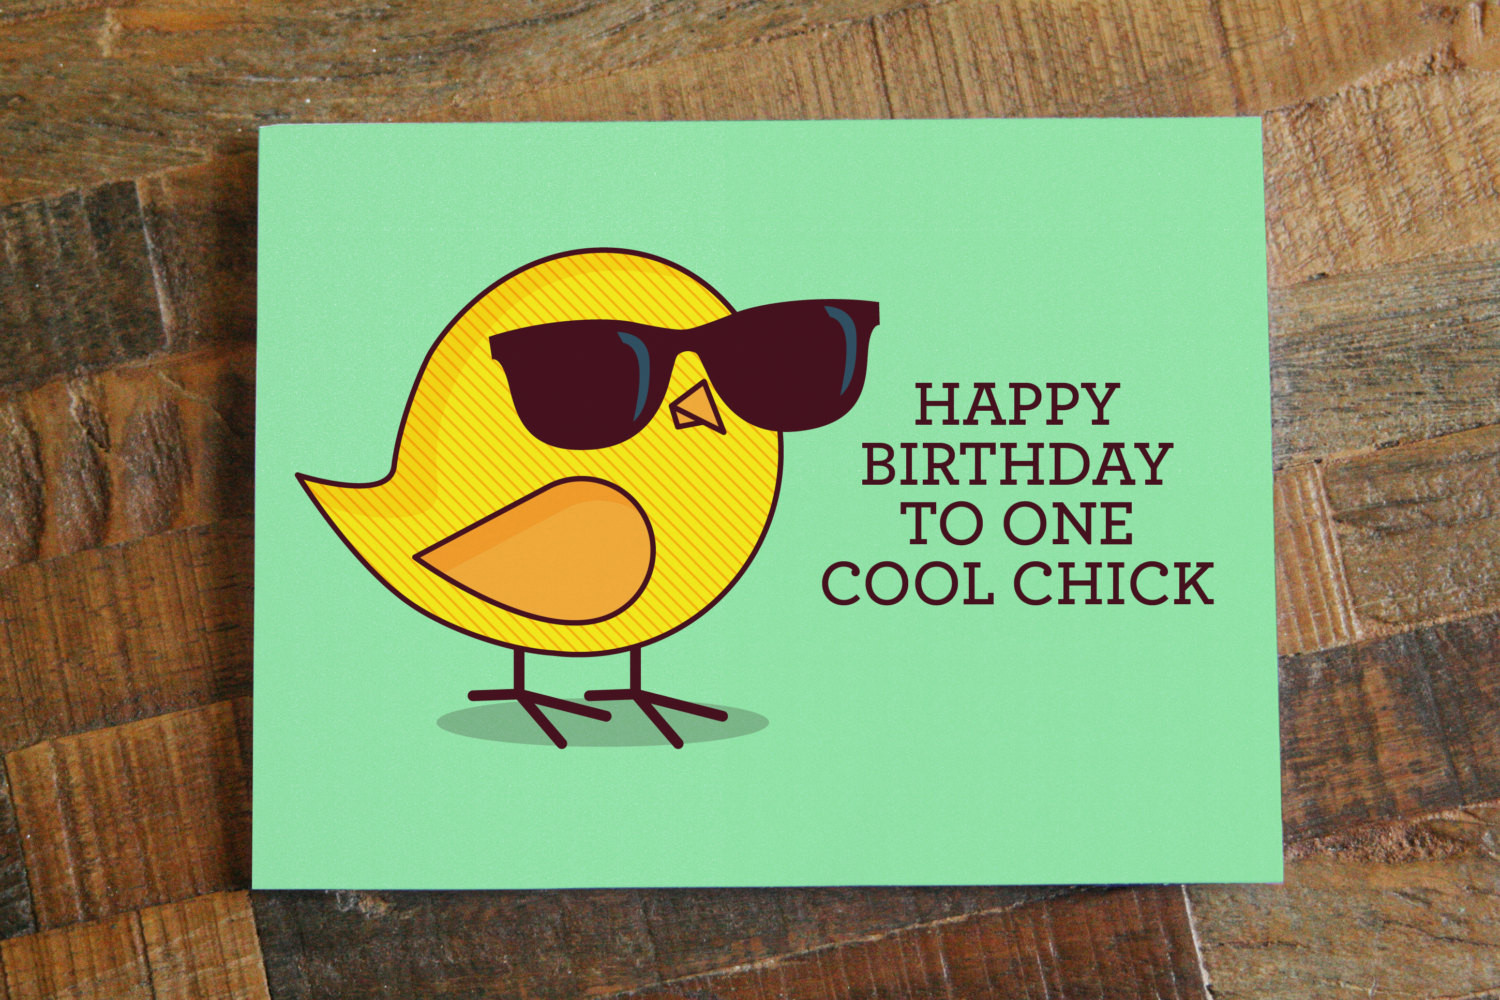 Funny Birthday Wishes For Women
 Funny Birthday Card For Her "Happy Birthday to e Cool